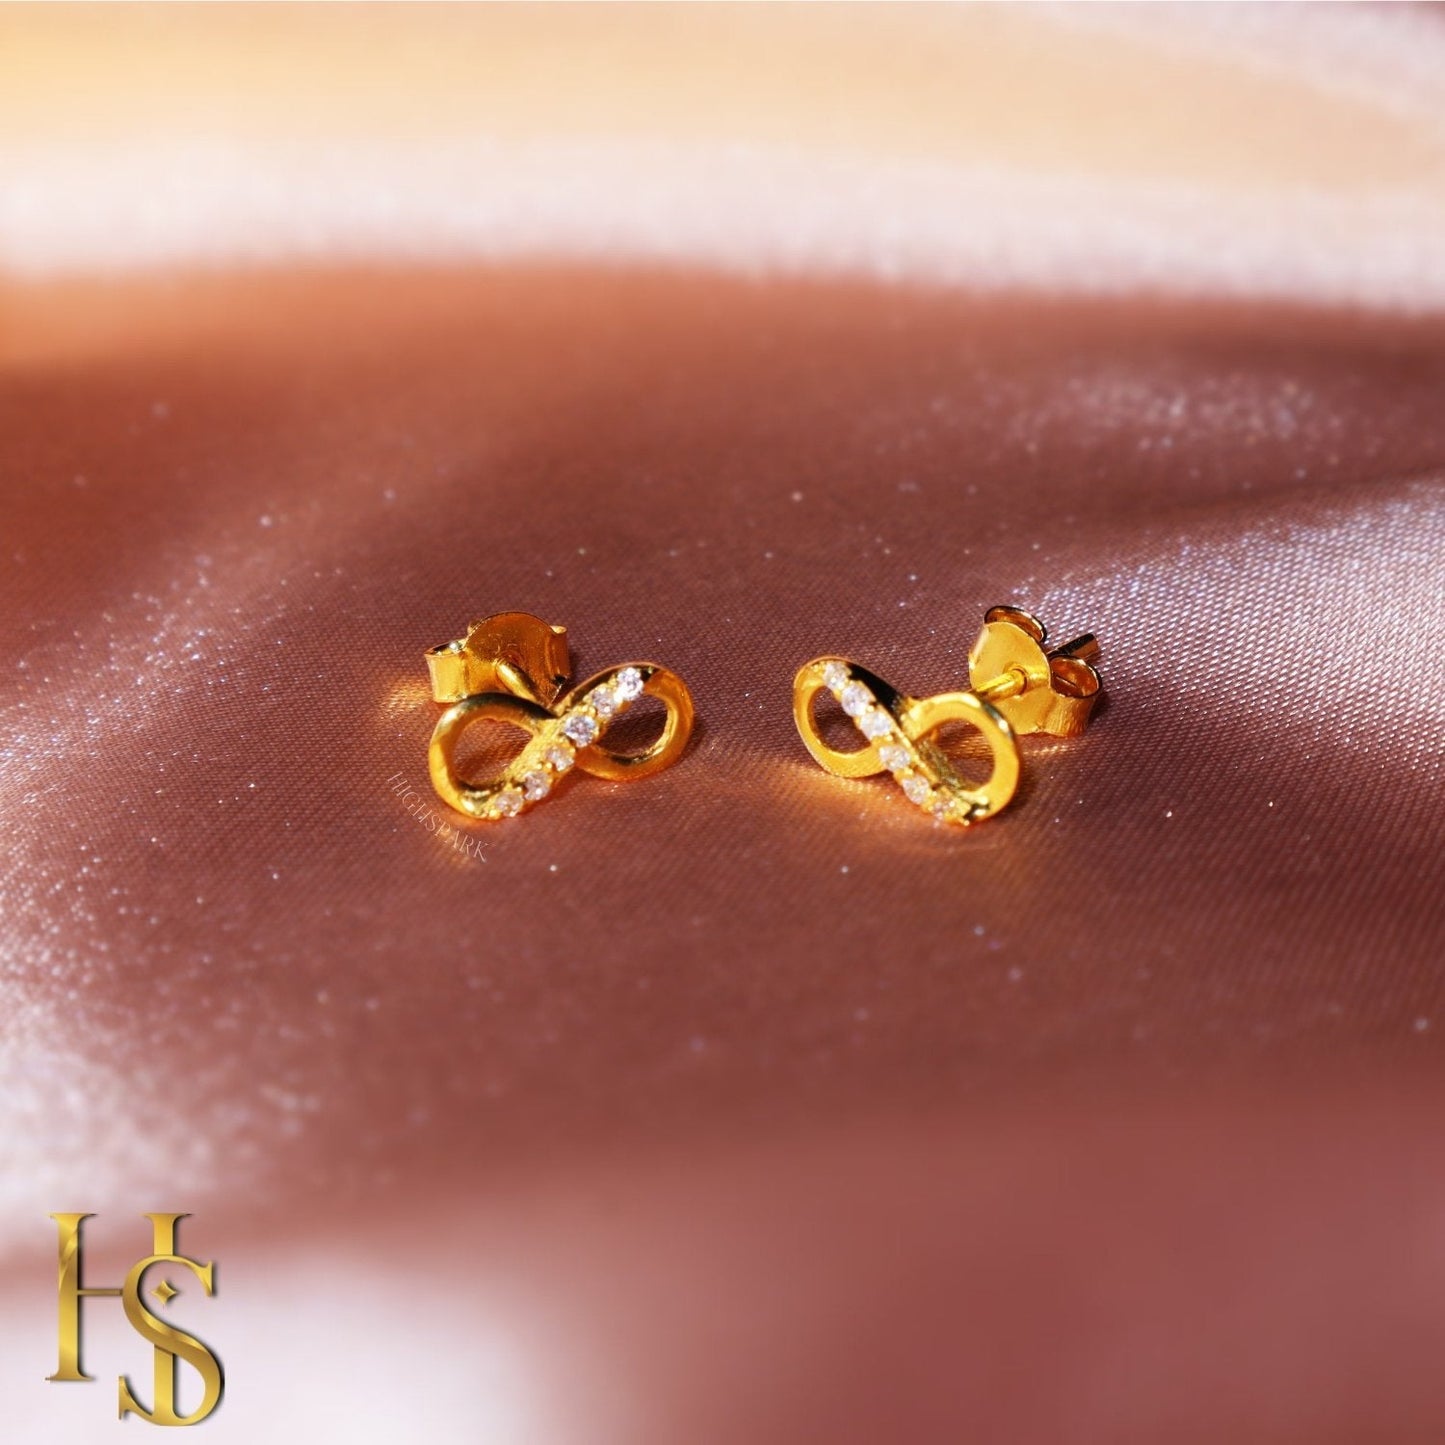 Gold Infinity Earrings in 92.5 Silver studded with Swiss Zirconia - 18K Gold finish